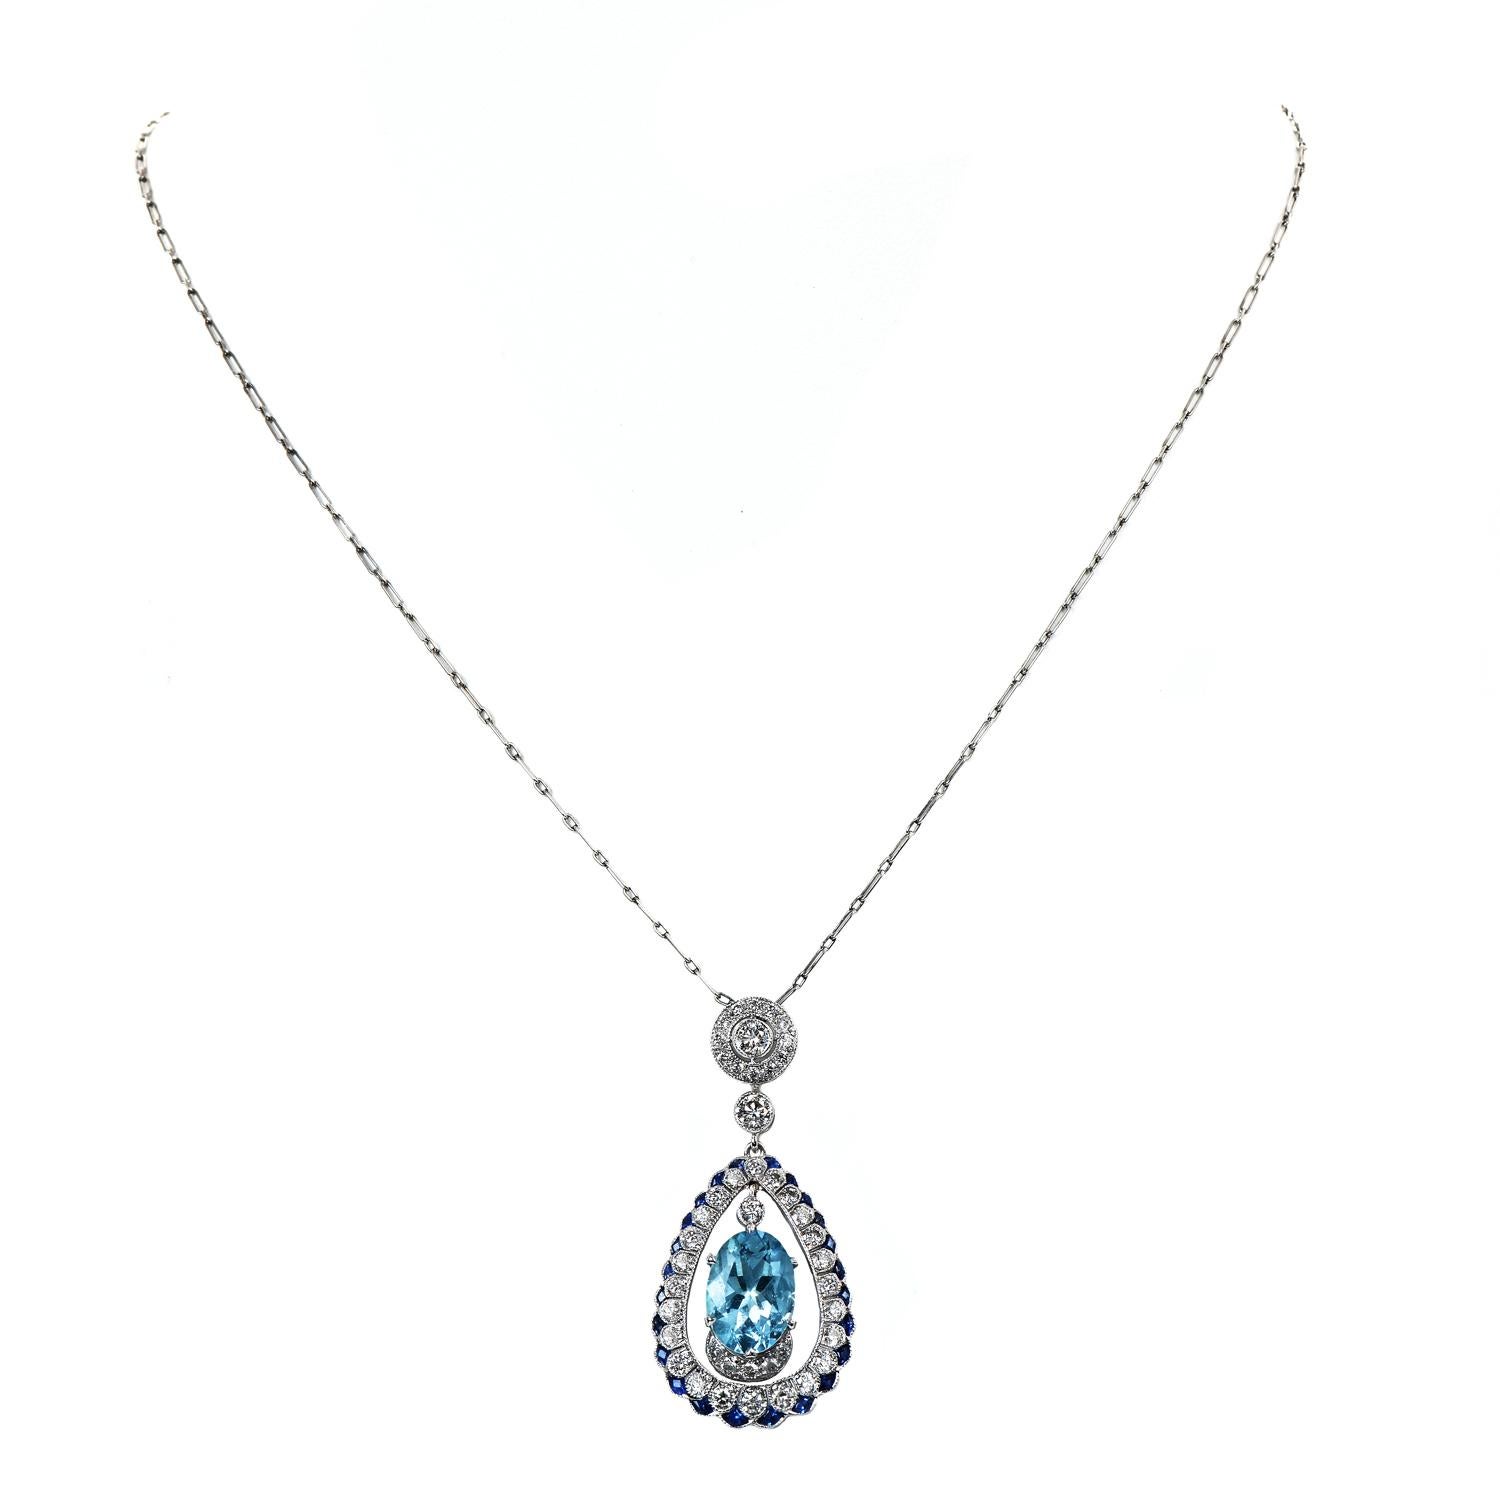 Dazzel Yourself with this outstanding aquamarine Necklace.

This Aquamarine Necklace is a vivid representation of romance, peace, and elegance that only contrast between blue Aquamarines & withe sparkly diamonds can bring.

Centered by an Oval